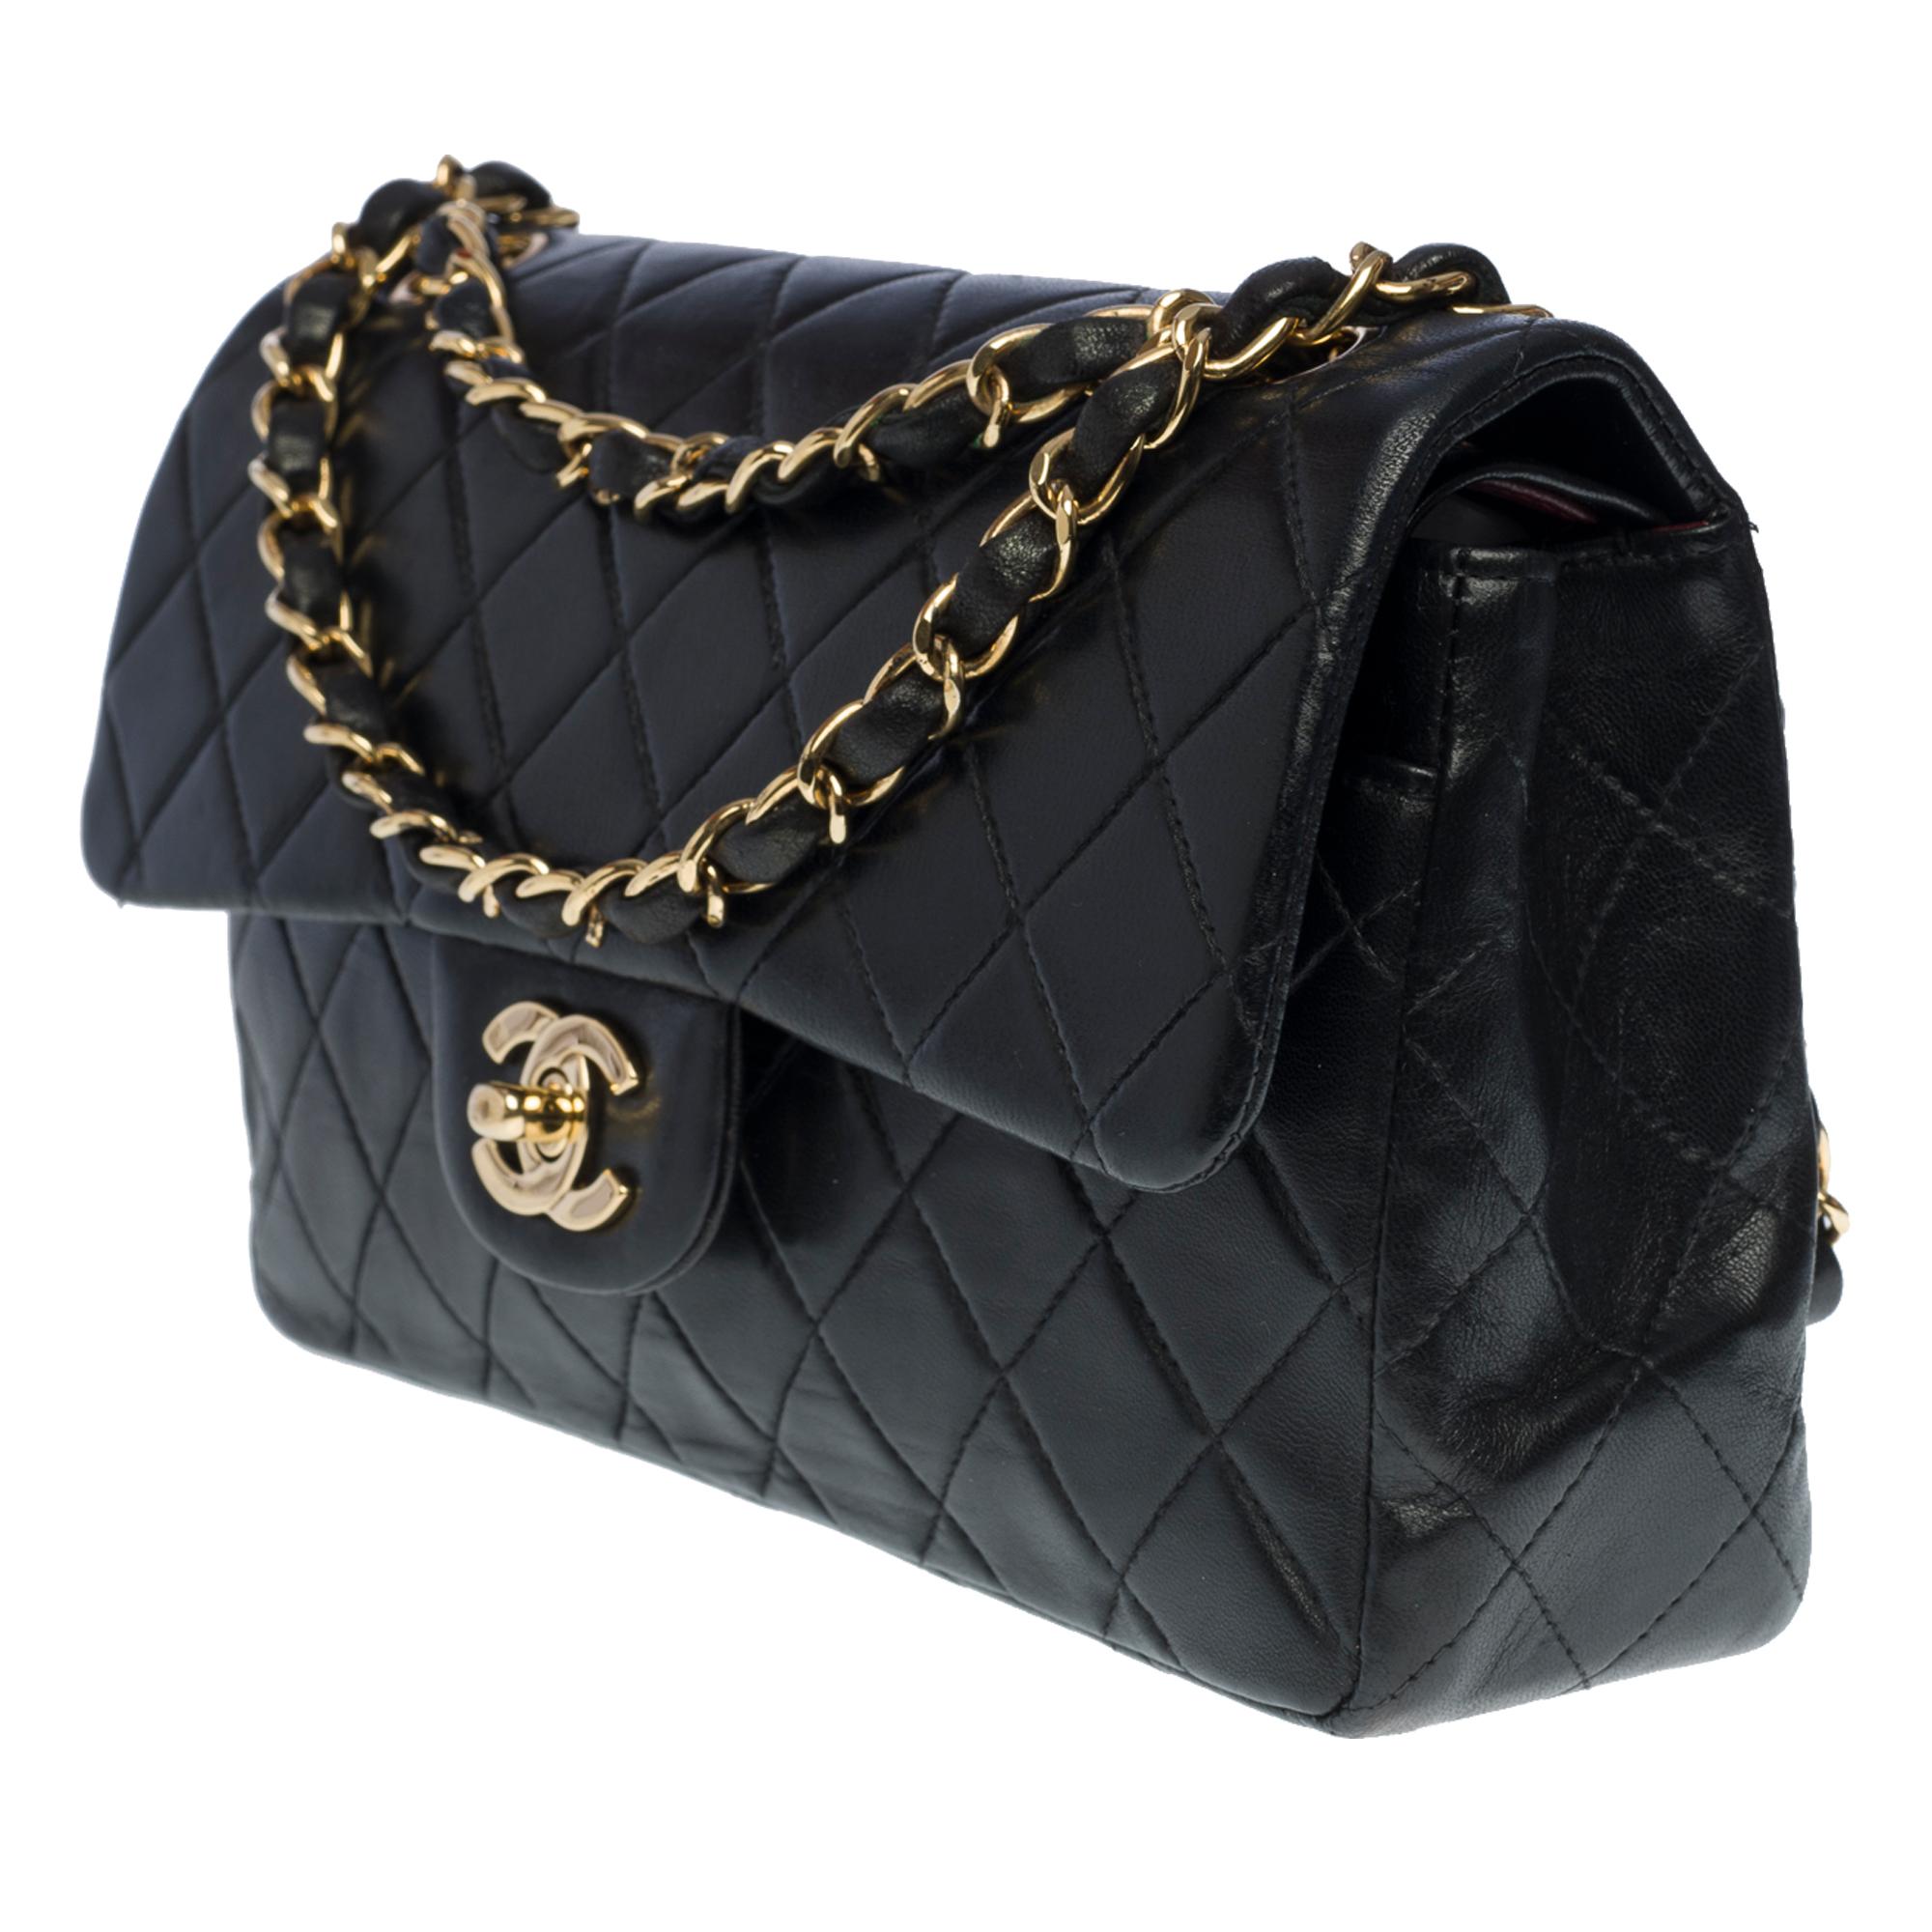 Women's Chanel Timeless 23cm double flap shoulder bag in black quilted lambskin, GHW